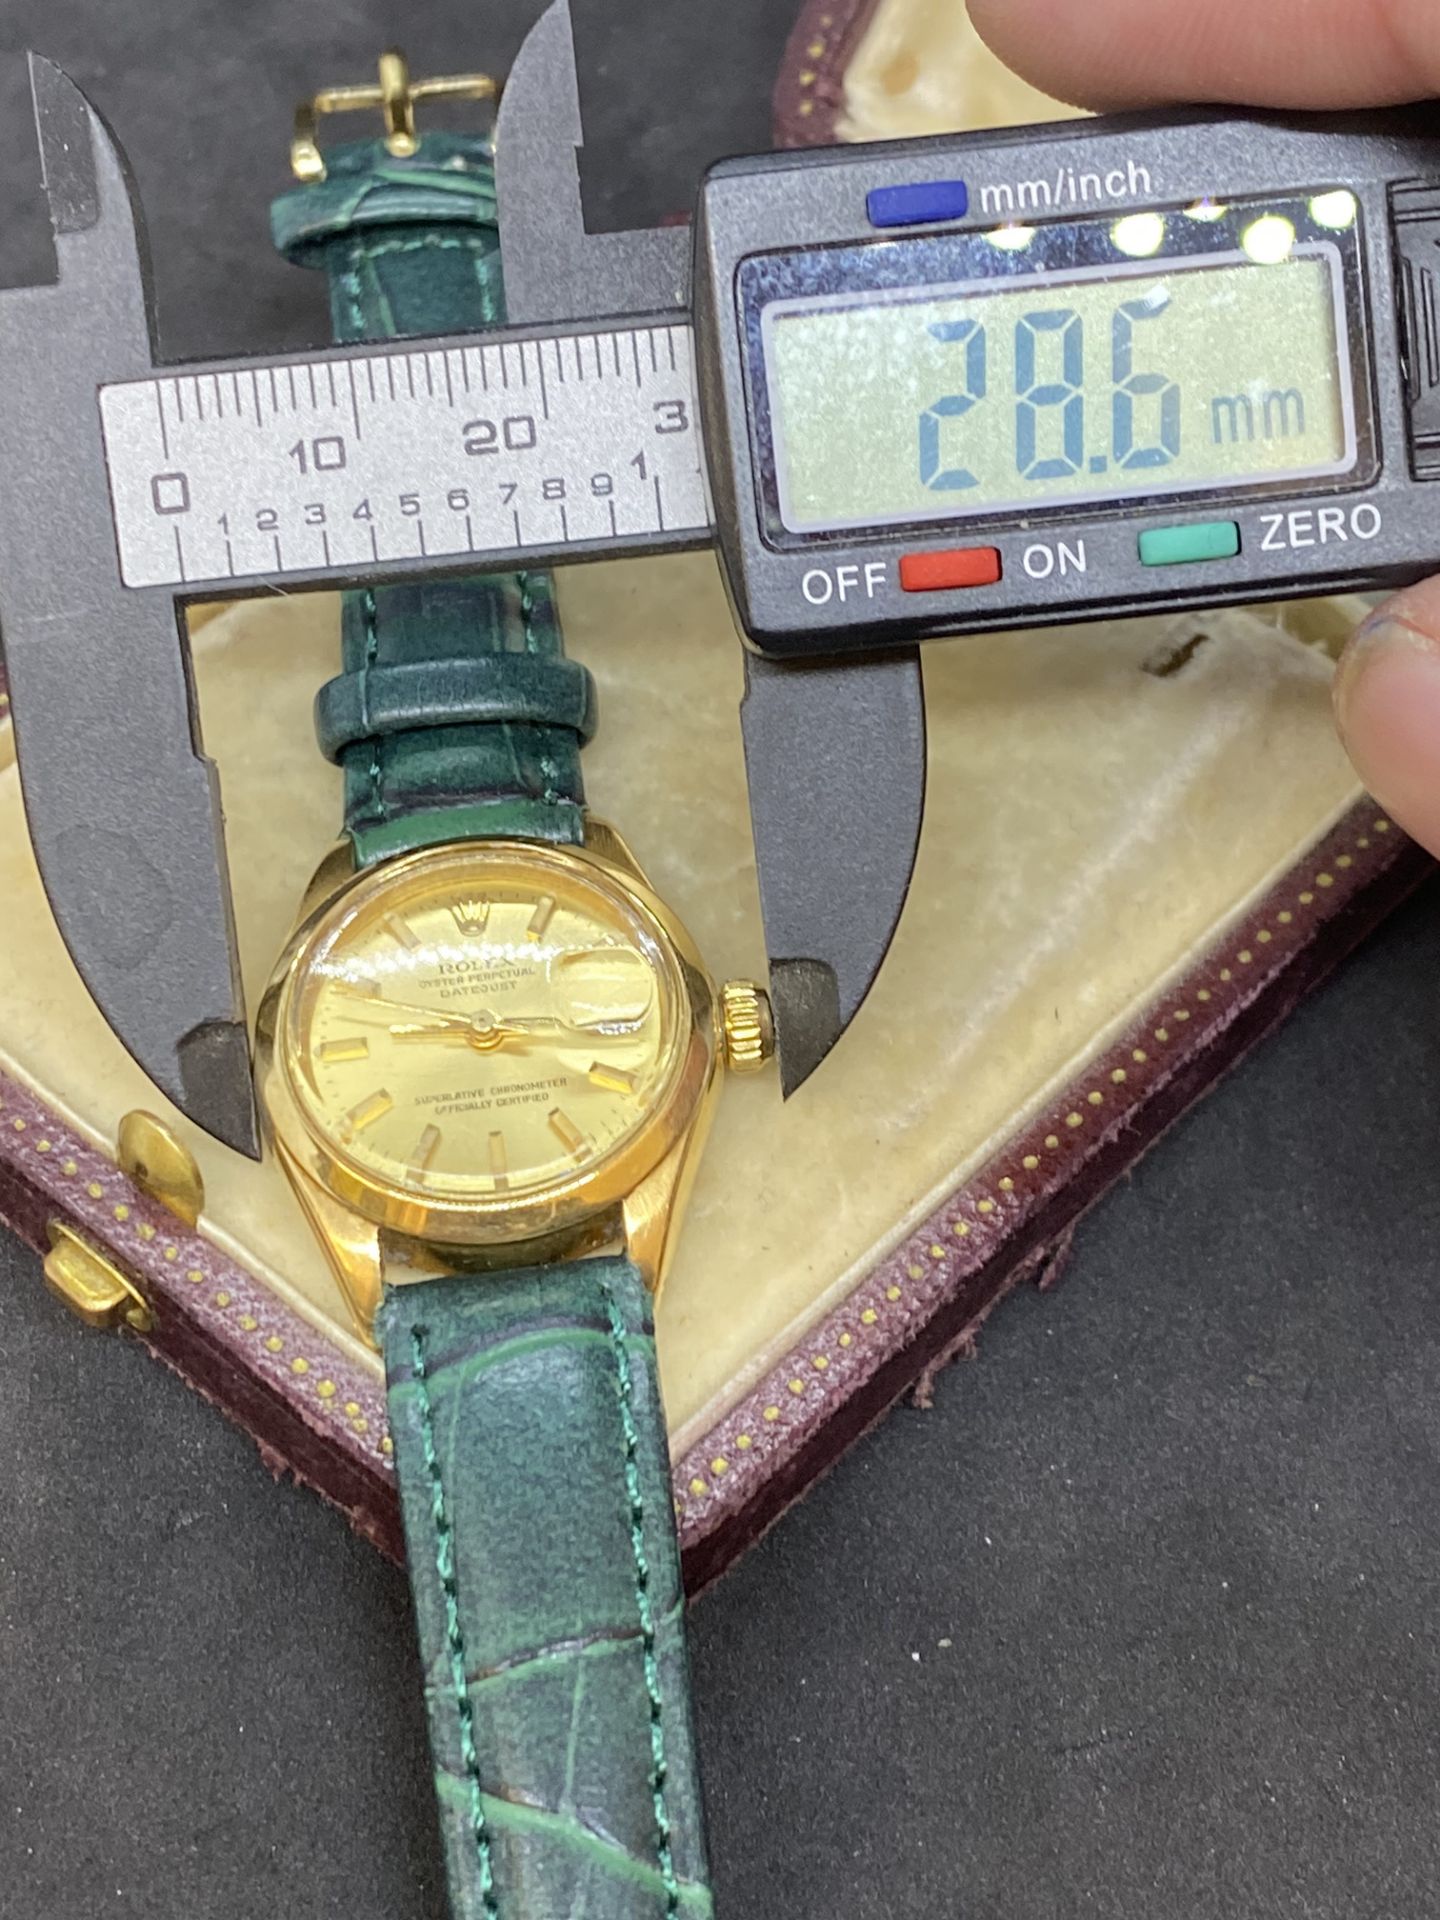 18ct GOLD ROLEX WATCH ON LEATHER STRAP - Image 5 of 8